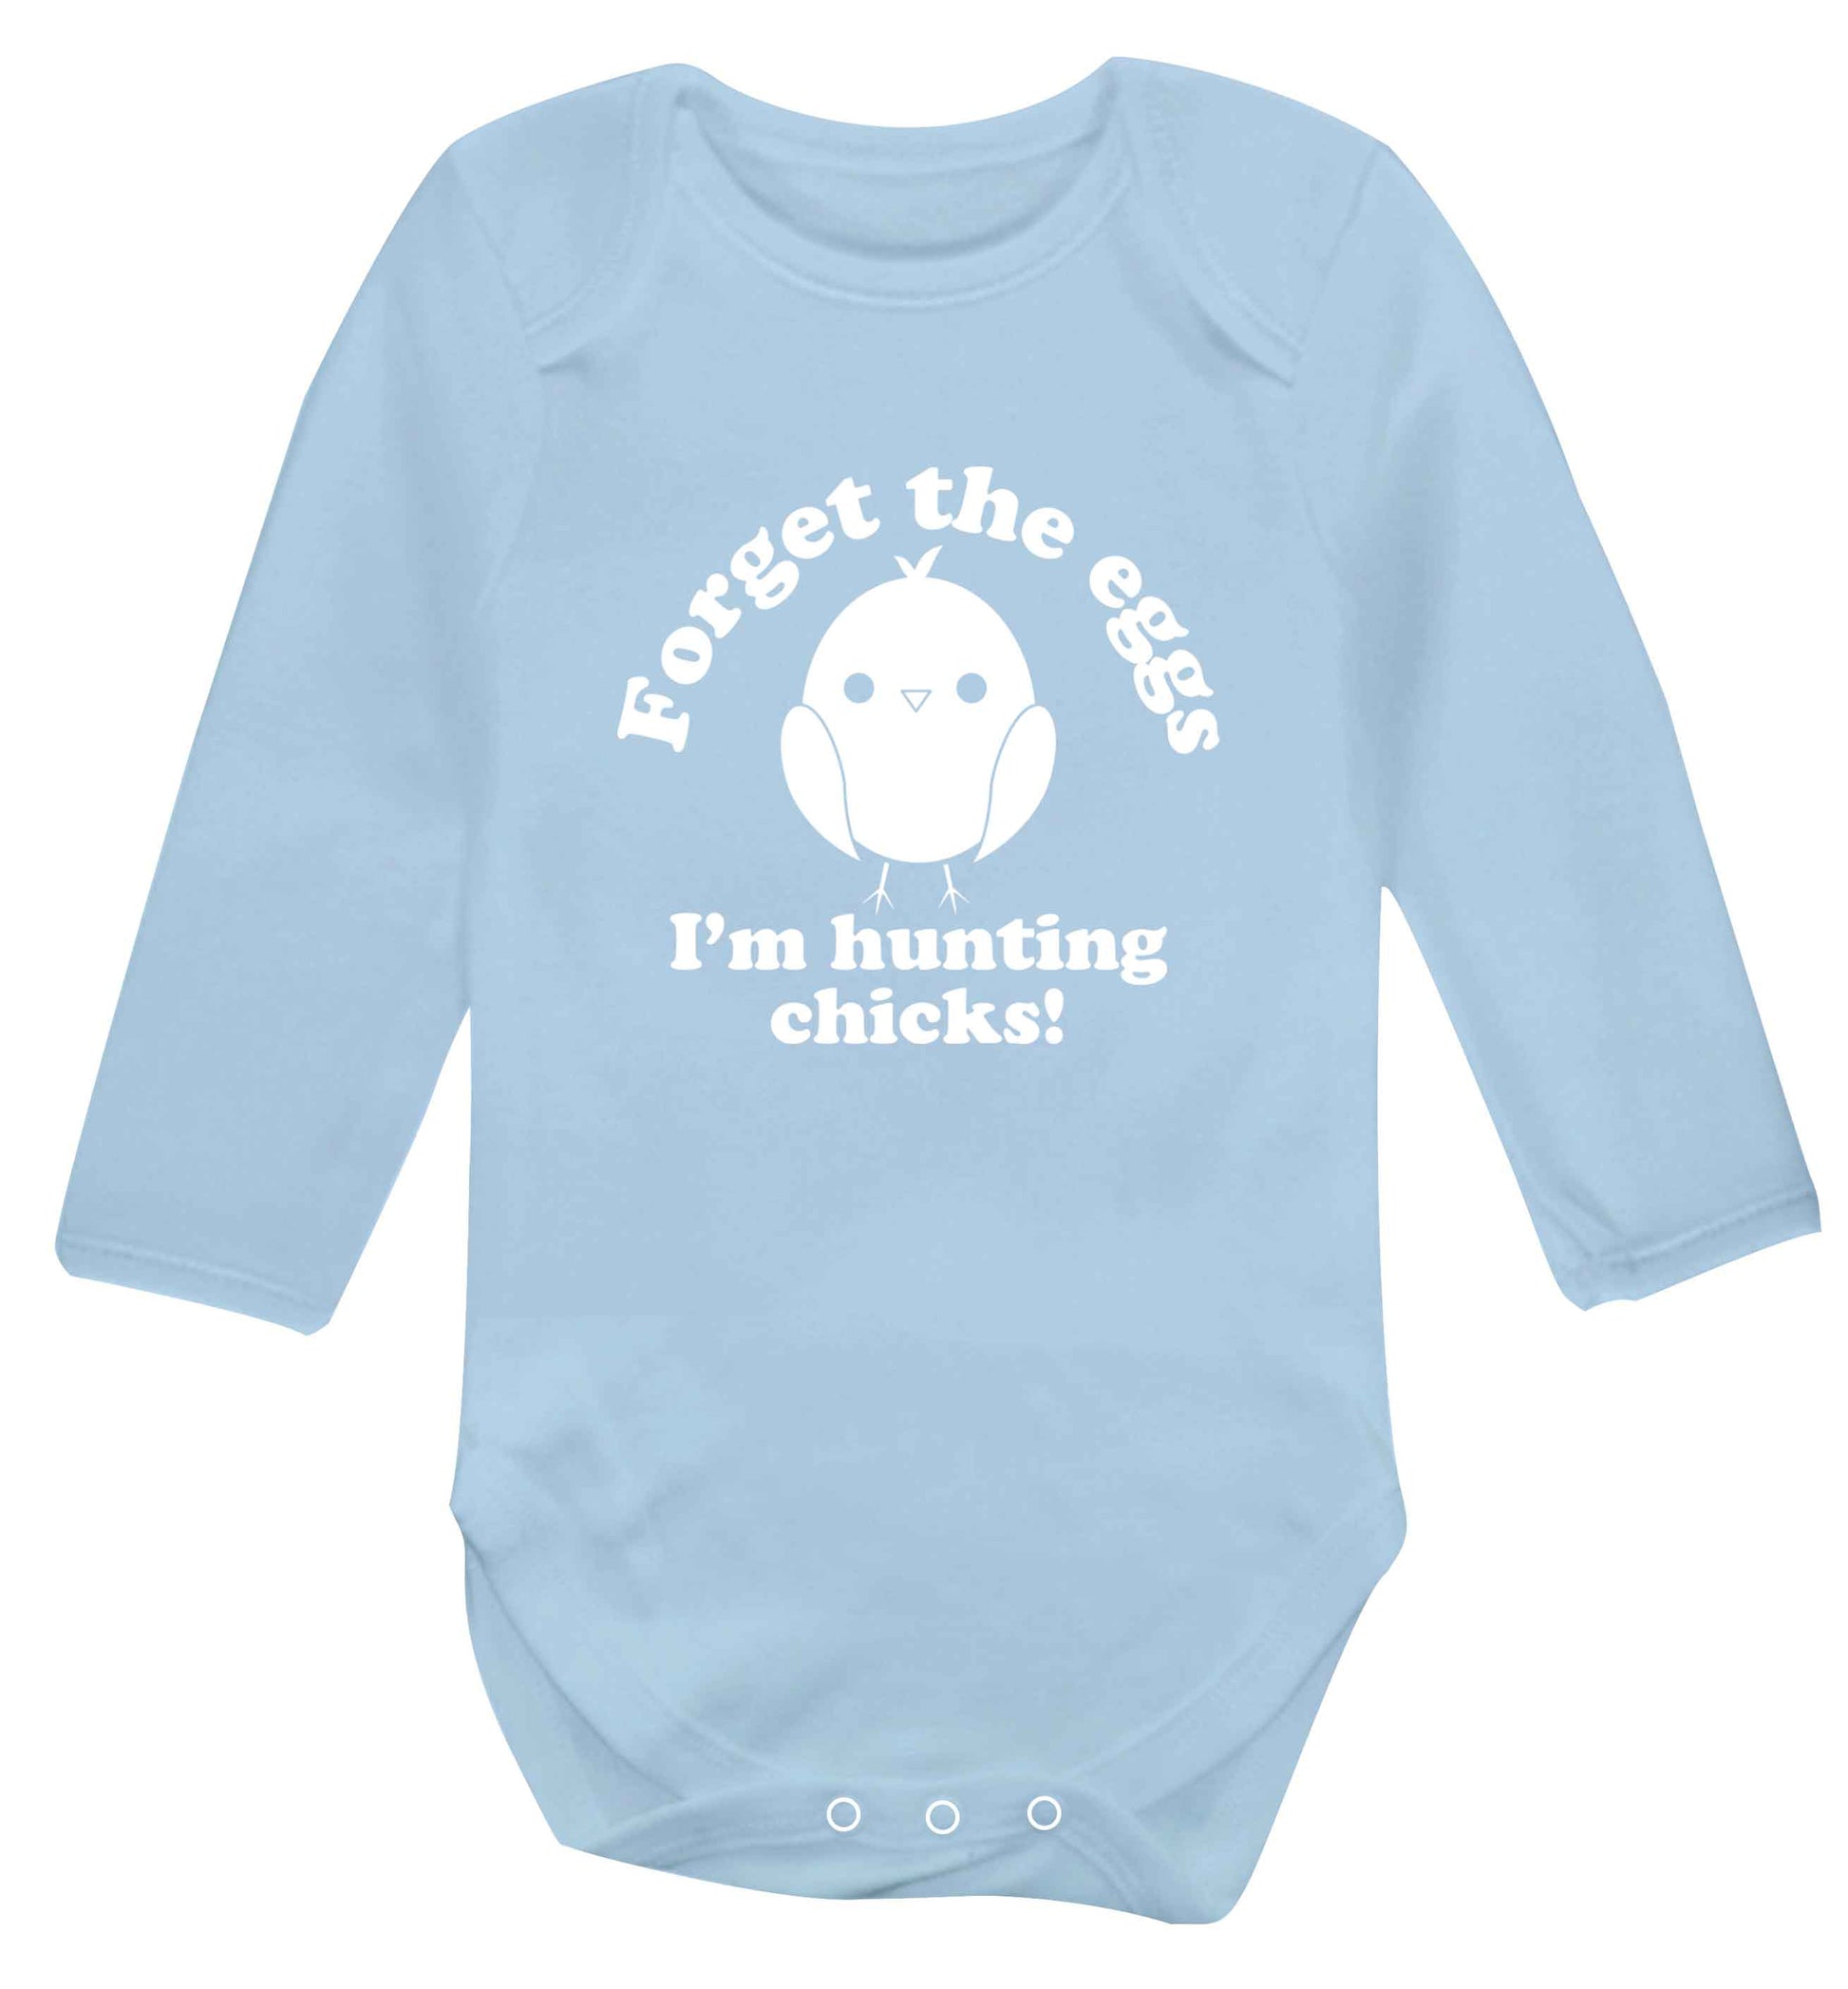 Forget the eggs I'm hunting chicks! baby vest long sleeved pale blue 6-12 months